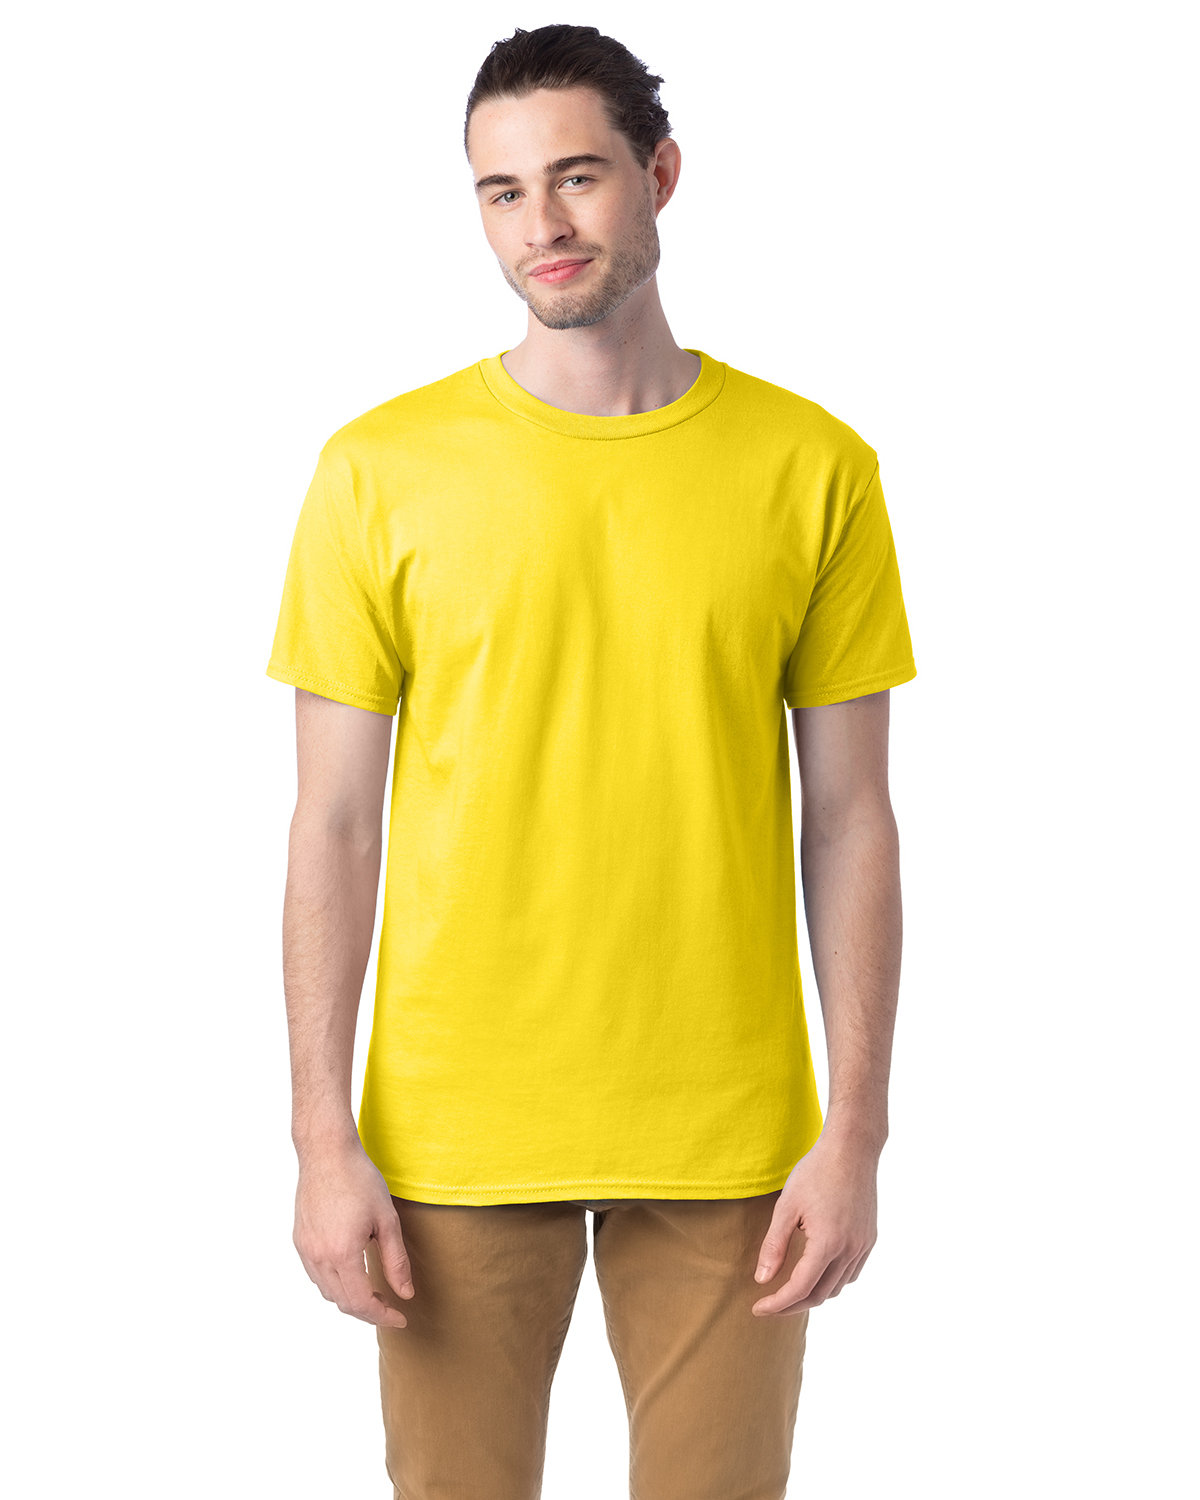 Hanes Adult Essential Short Sleeve T-Shirt athletic yellow 